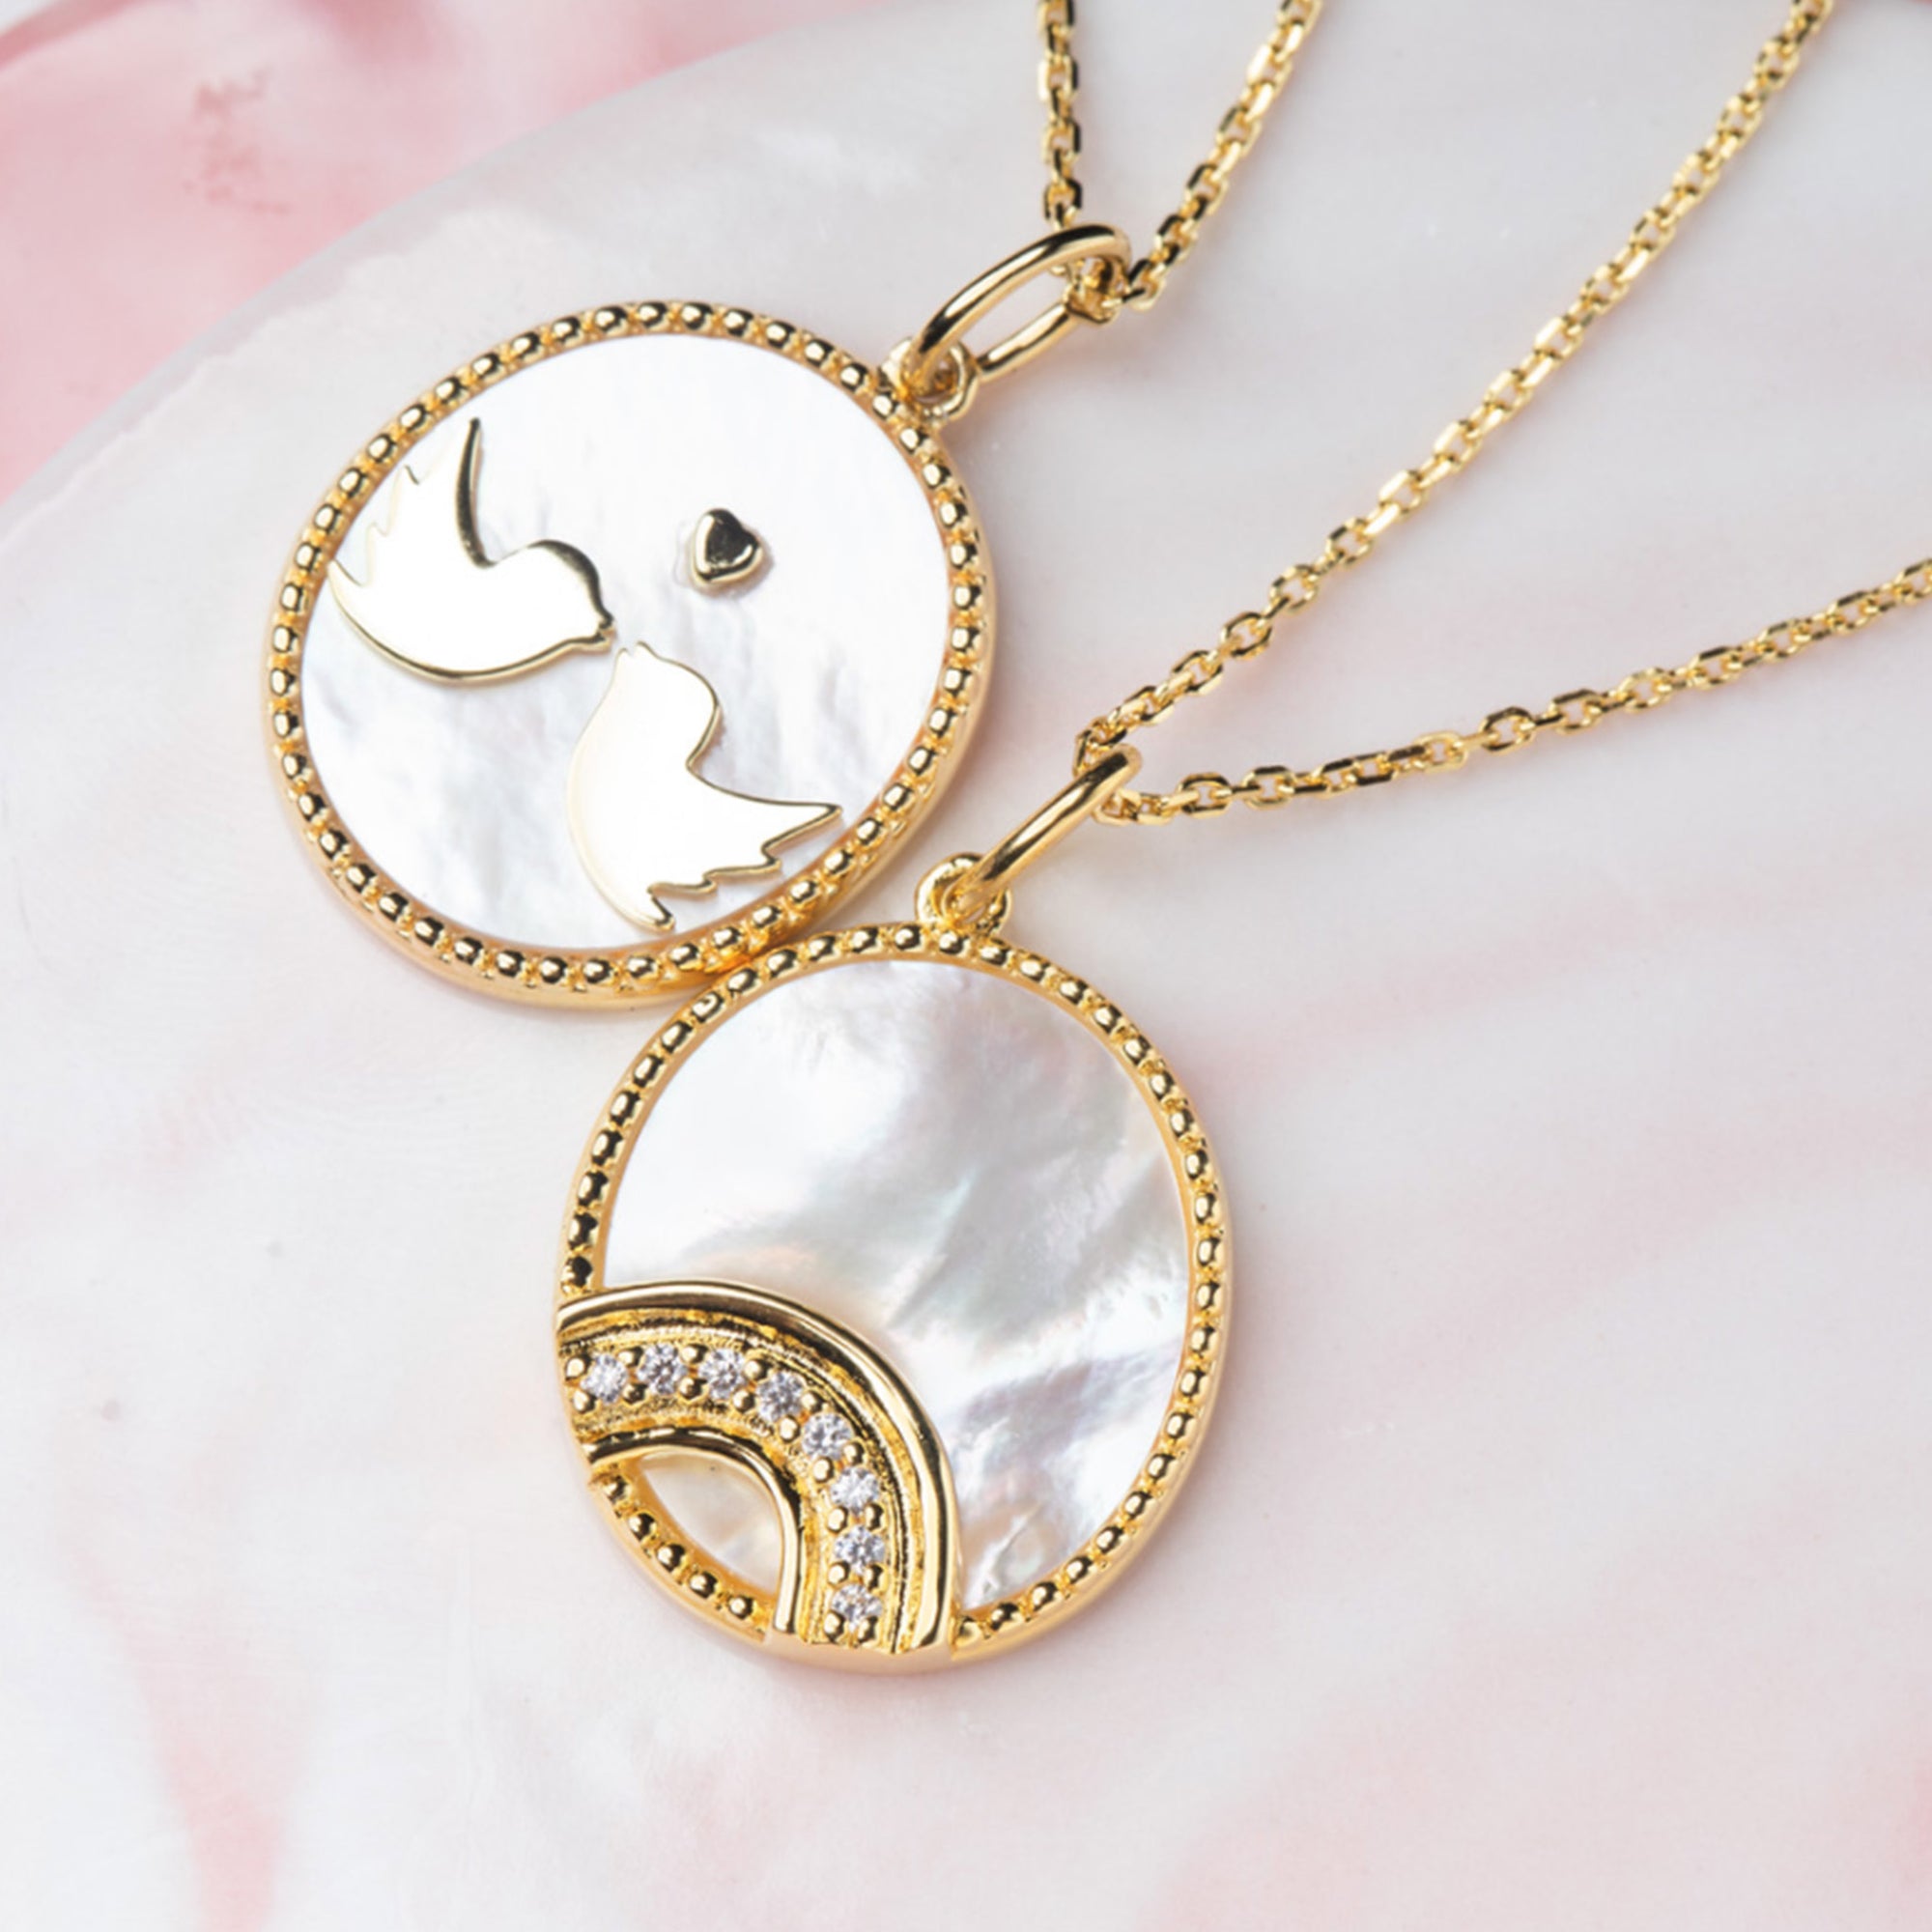 Mother Of Pearl Pendant | Shubhanjali | Care for Your Mind, Body & Soul!